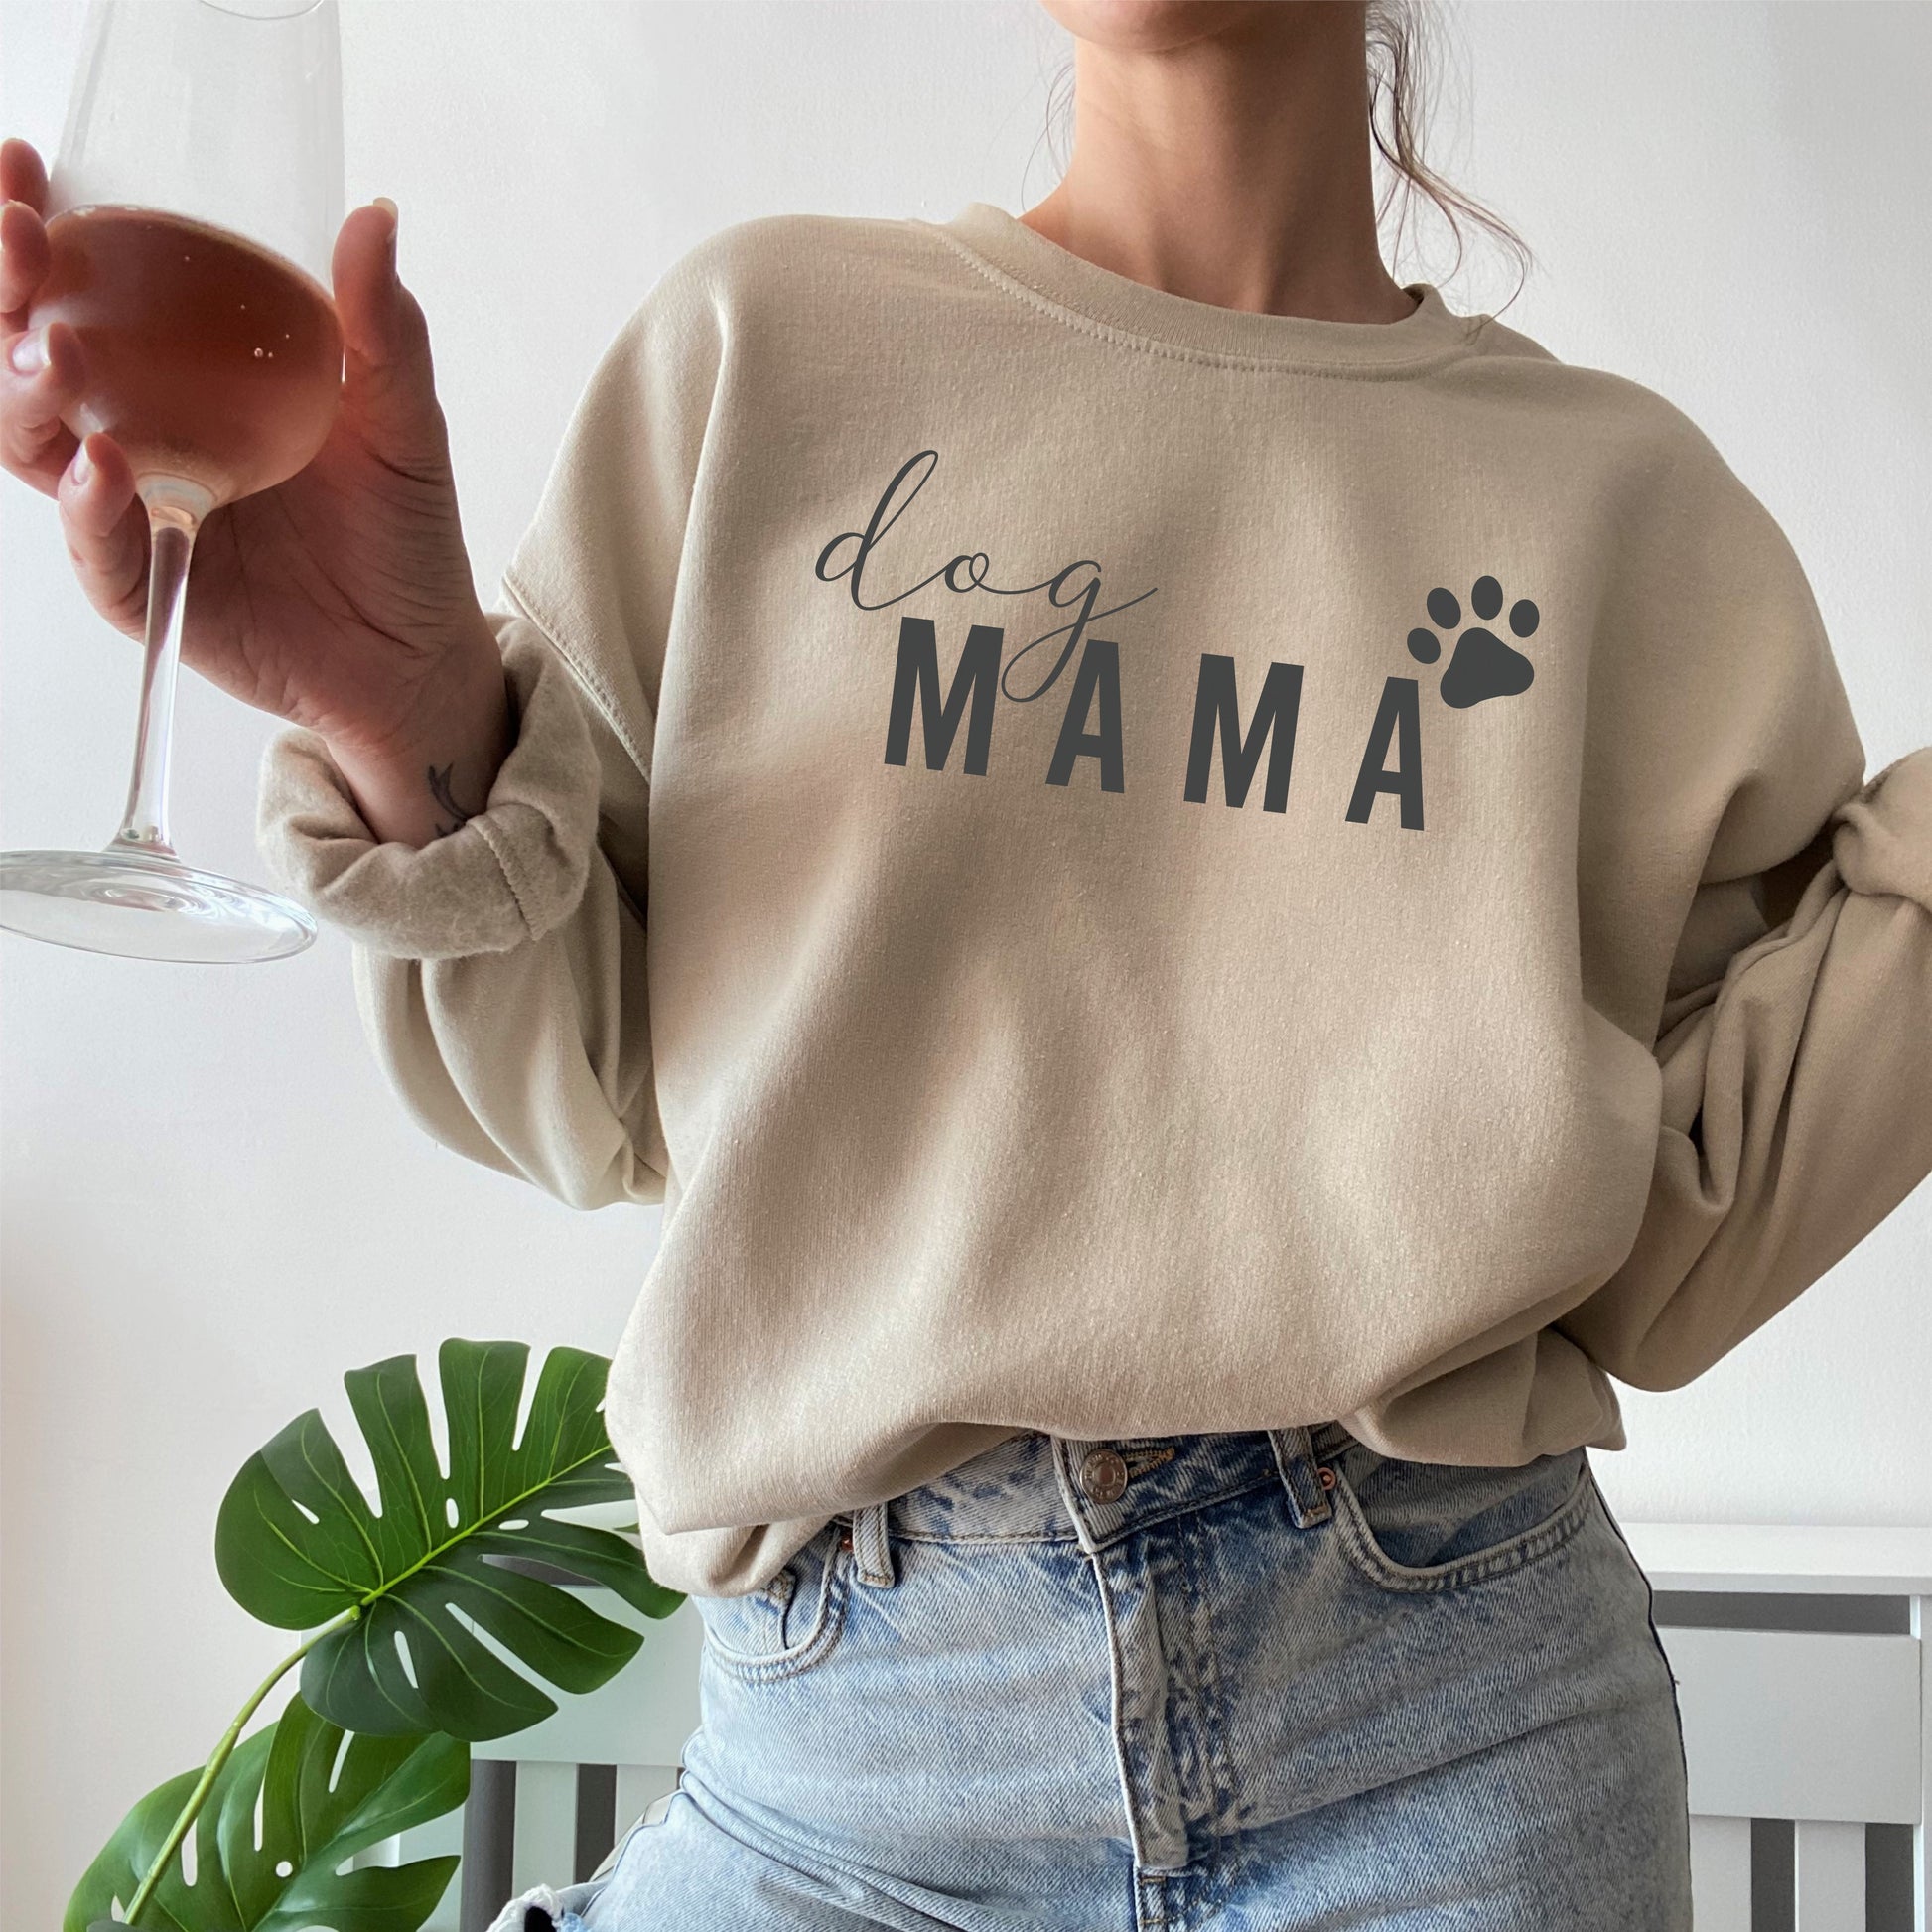 Sand Sweater with dog mama text Handmade in Yorkshire by F&B Crafts